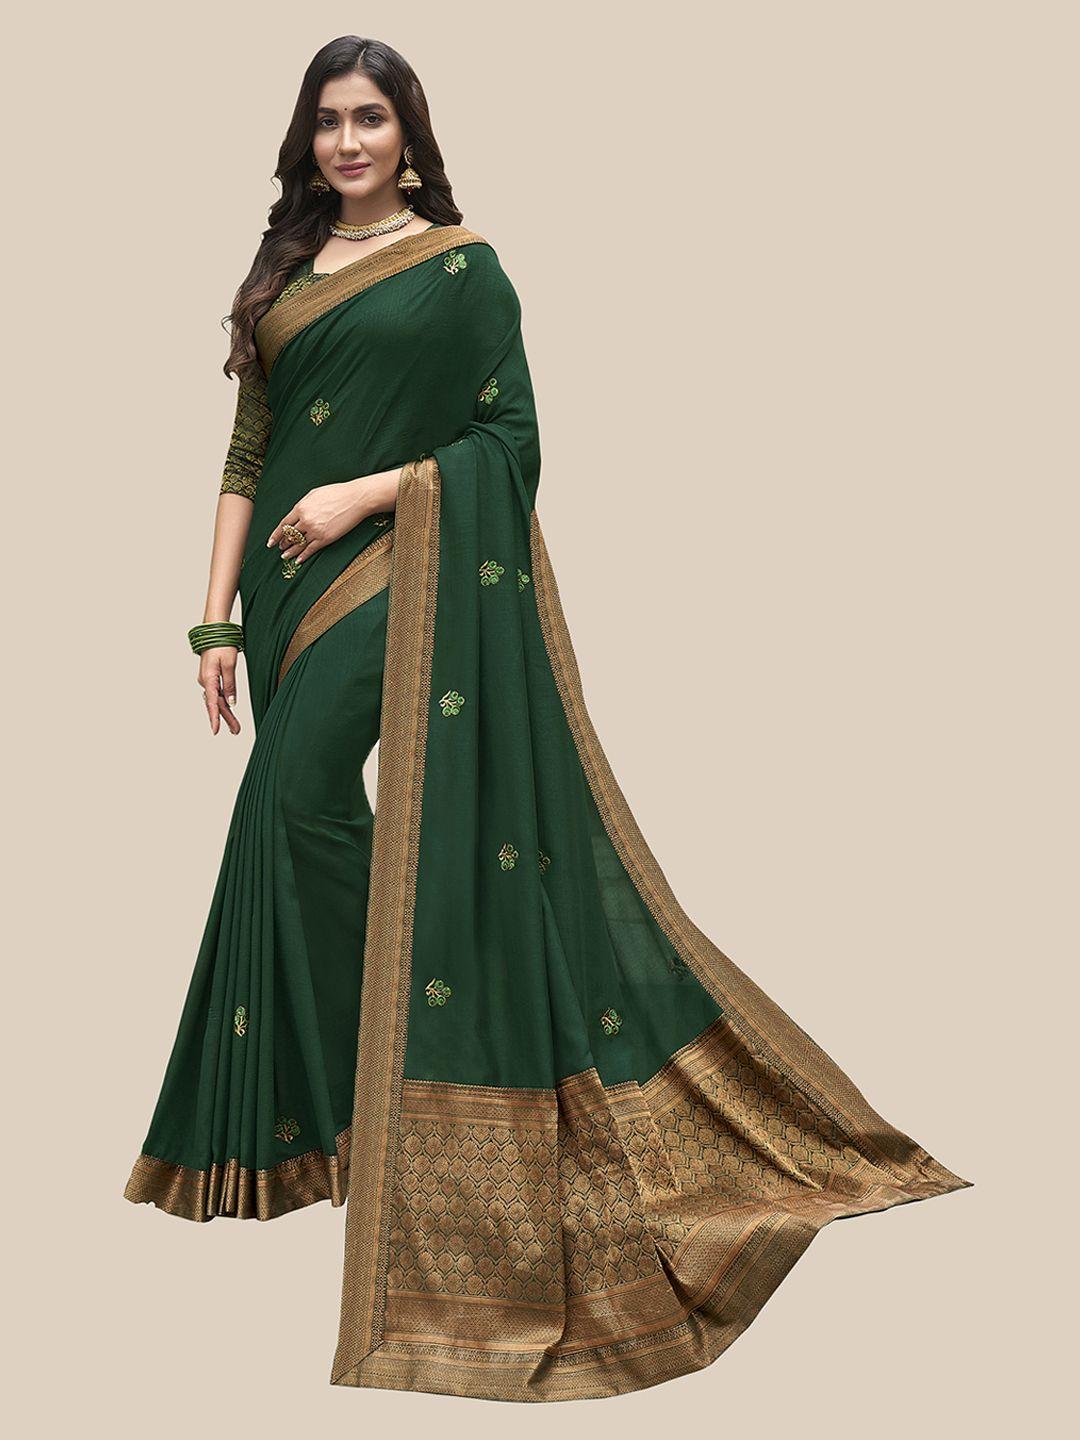 united liberty green & gold-toned floral embroidered art silk block print saree